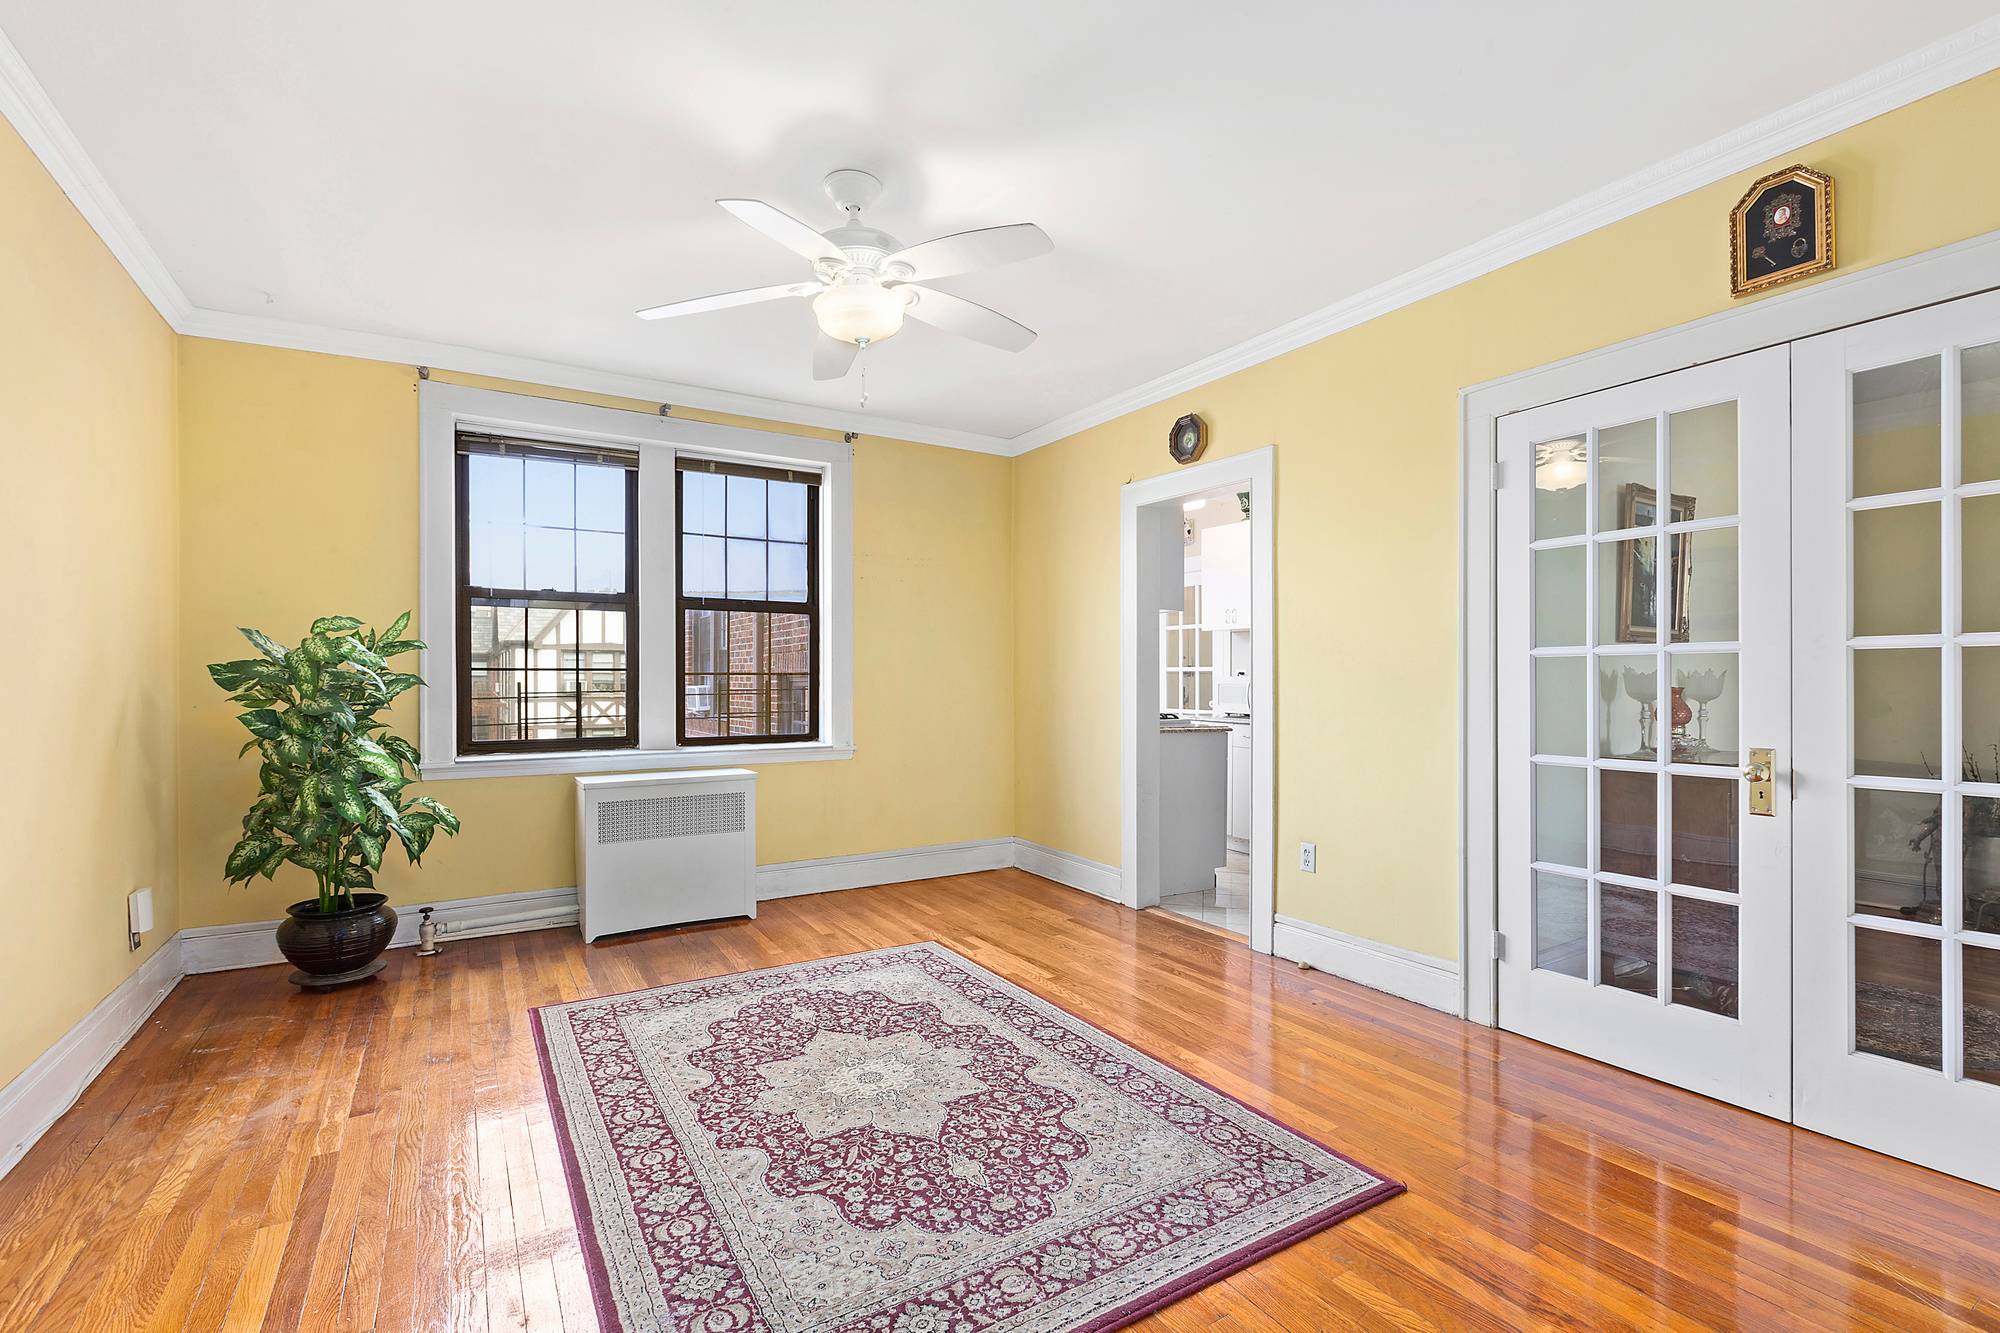 Space and light welcome you into this coveted top floor prewar 2 bedroom apartment.